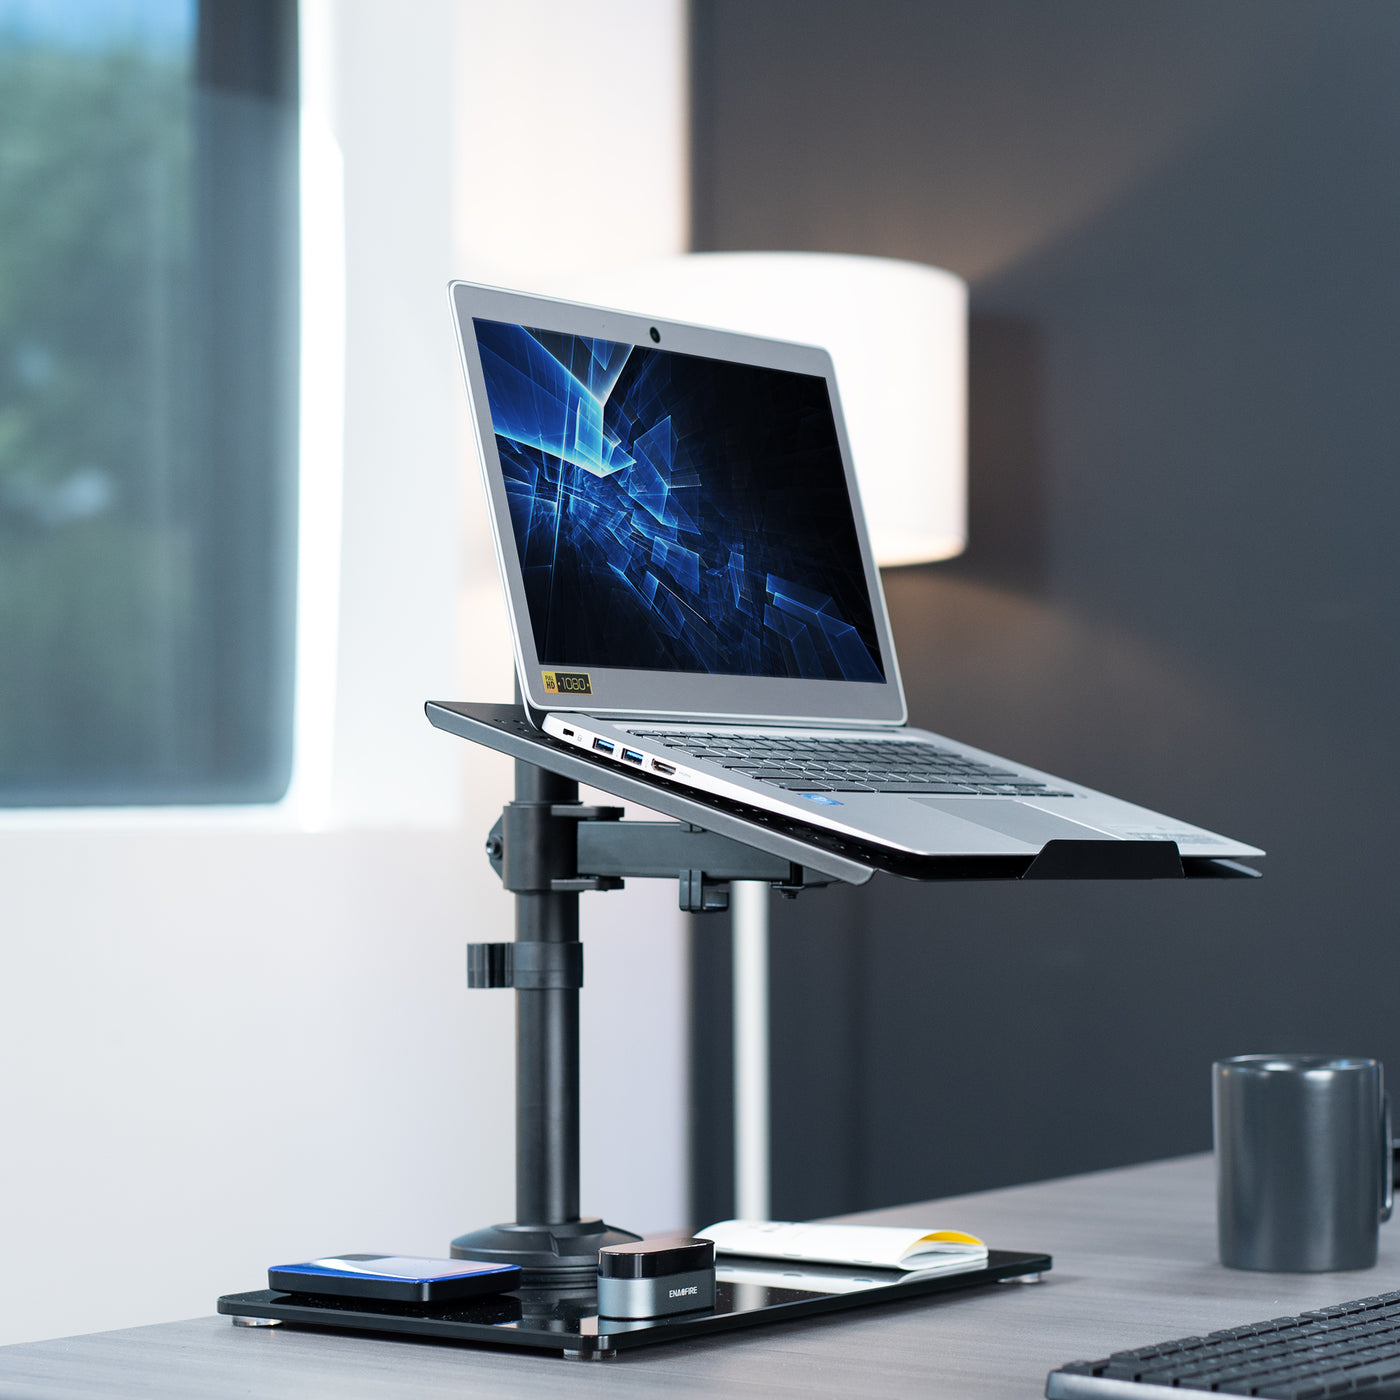 Freestanding laptop stand with elegant glass base for ergonomic viewing and adjustable placement.